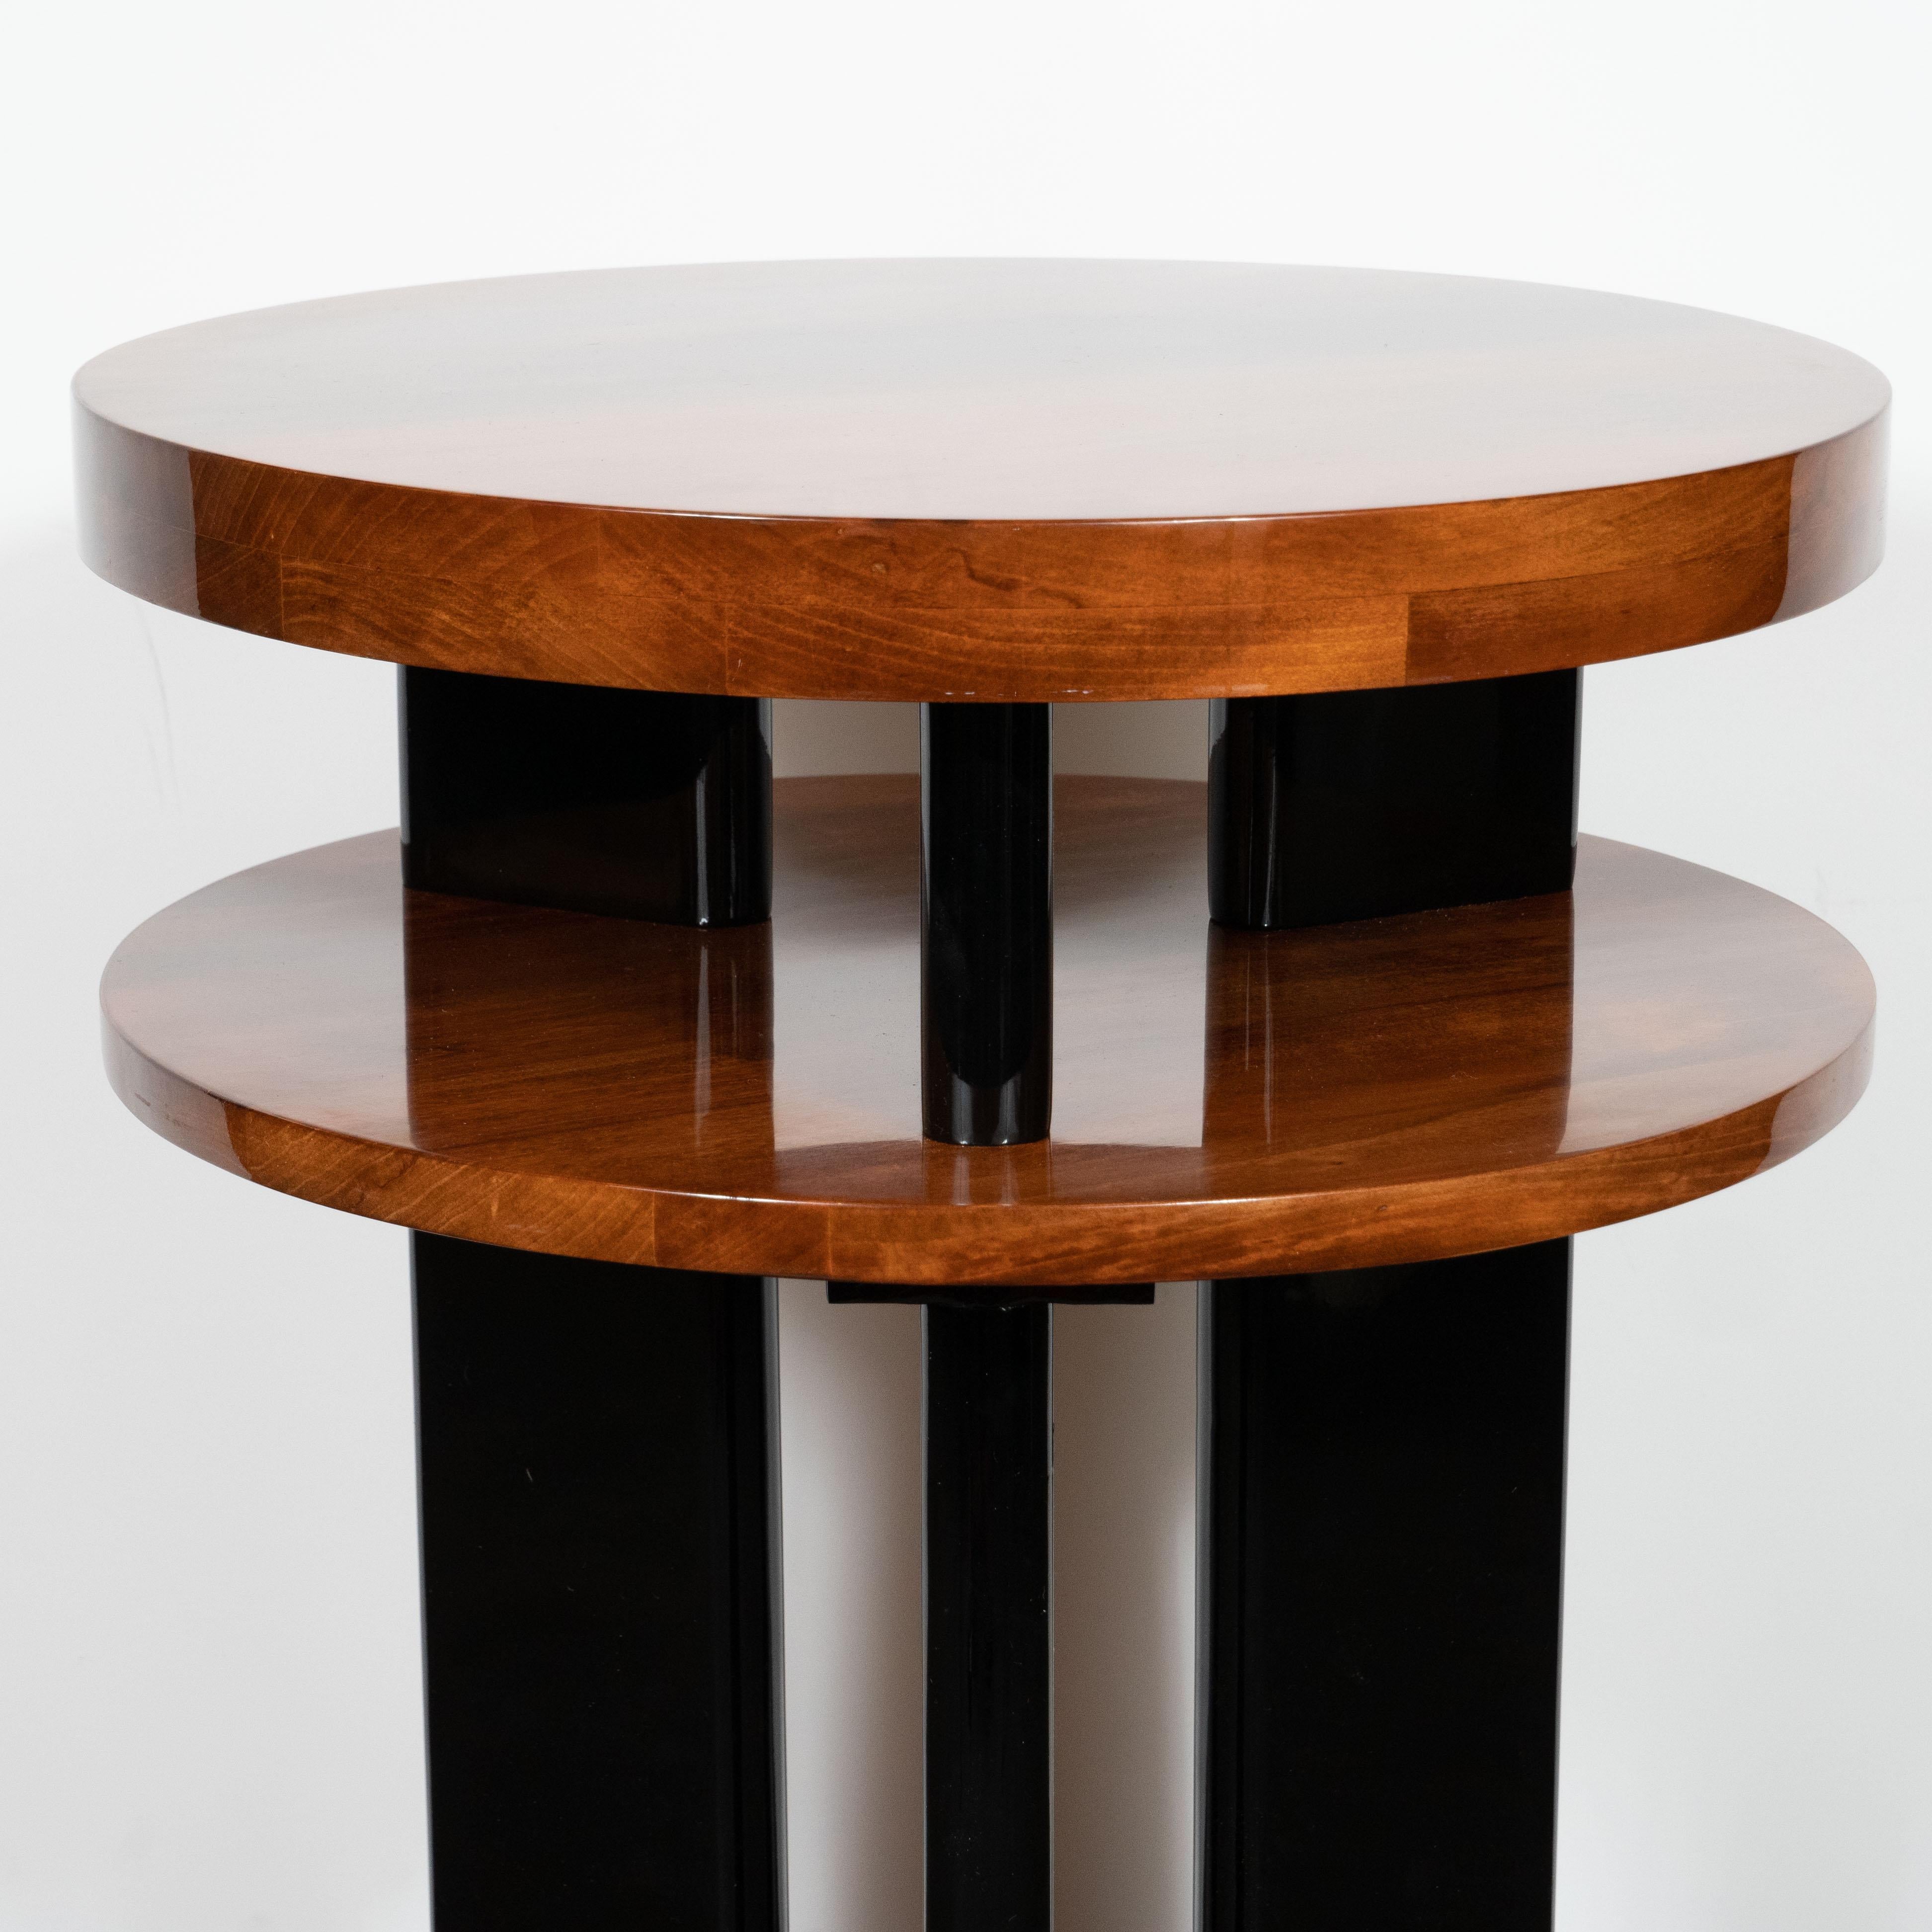 Mid-20th Century Art Deco Machine Age Three-Tier Bookmatched Walnut and Black Lacquer Side Table For Sale